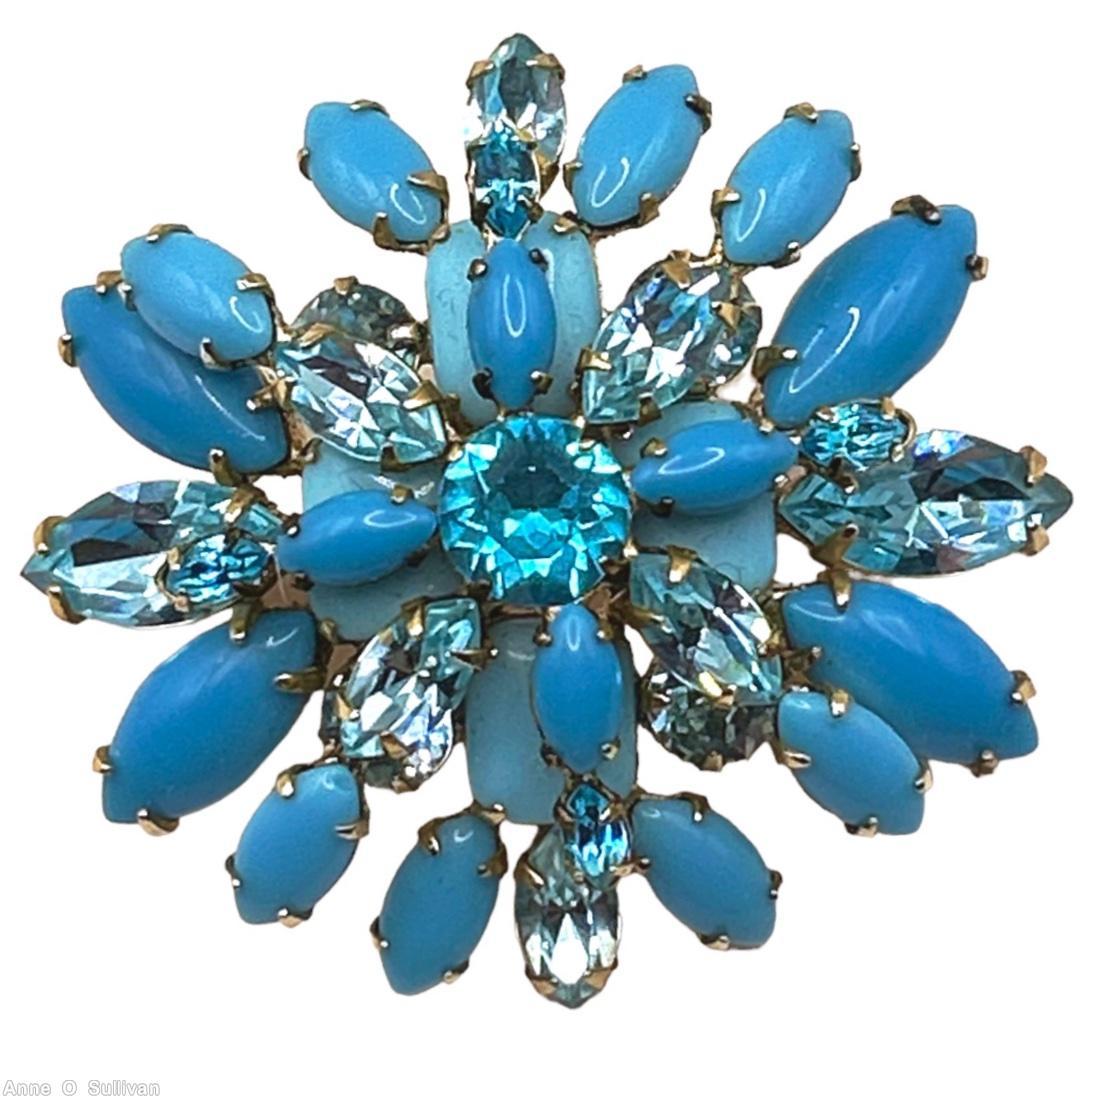 Schreiner 2 level redical pin top chaton center 8 surrounding branch of 2 navette bottom 4 large rectangle stone 2 group of 3 large navette 2 group of 3 small navette aqua chaton center opaque babyblue navette ice blue faceted navette goldtone jewelry